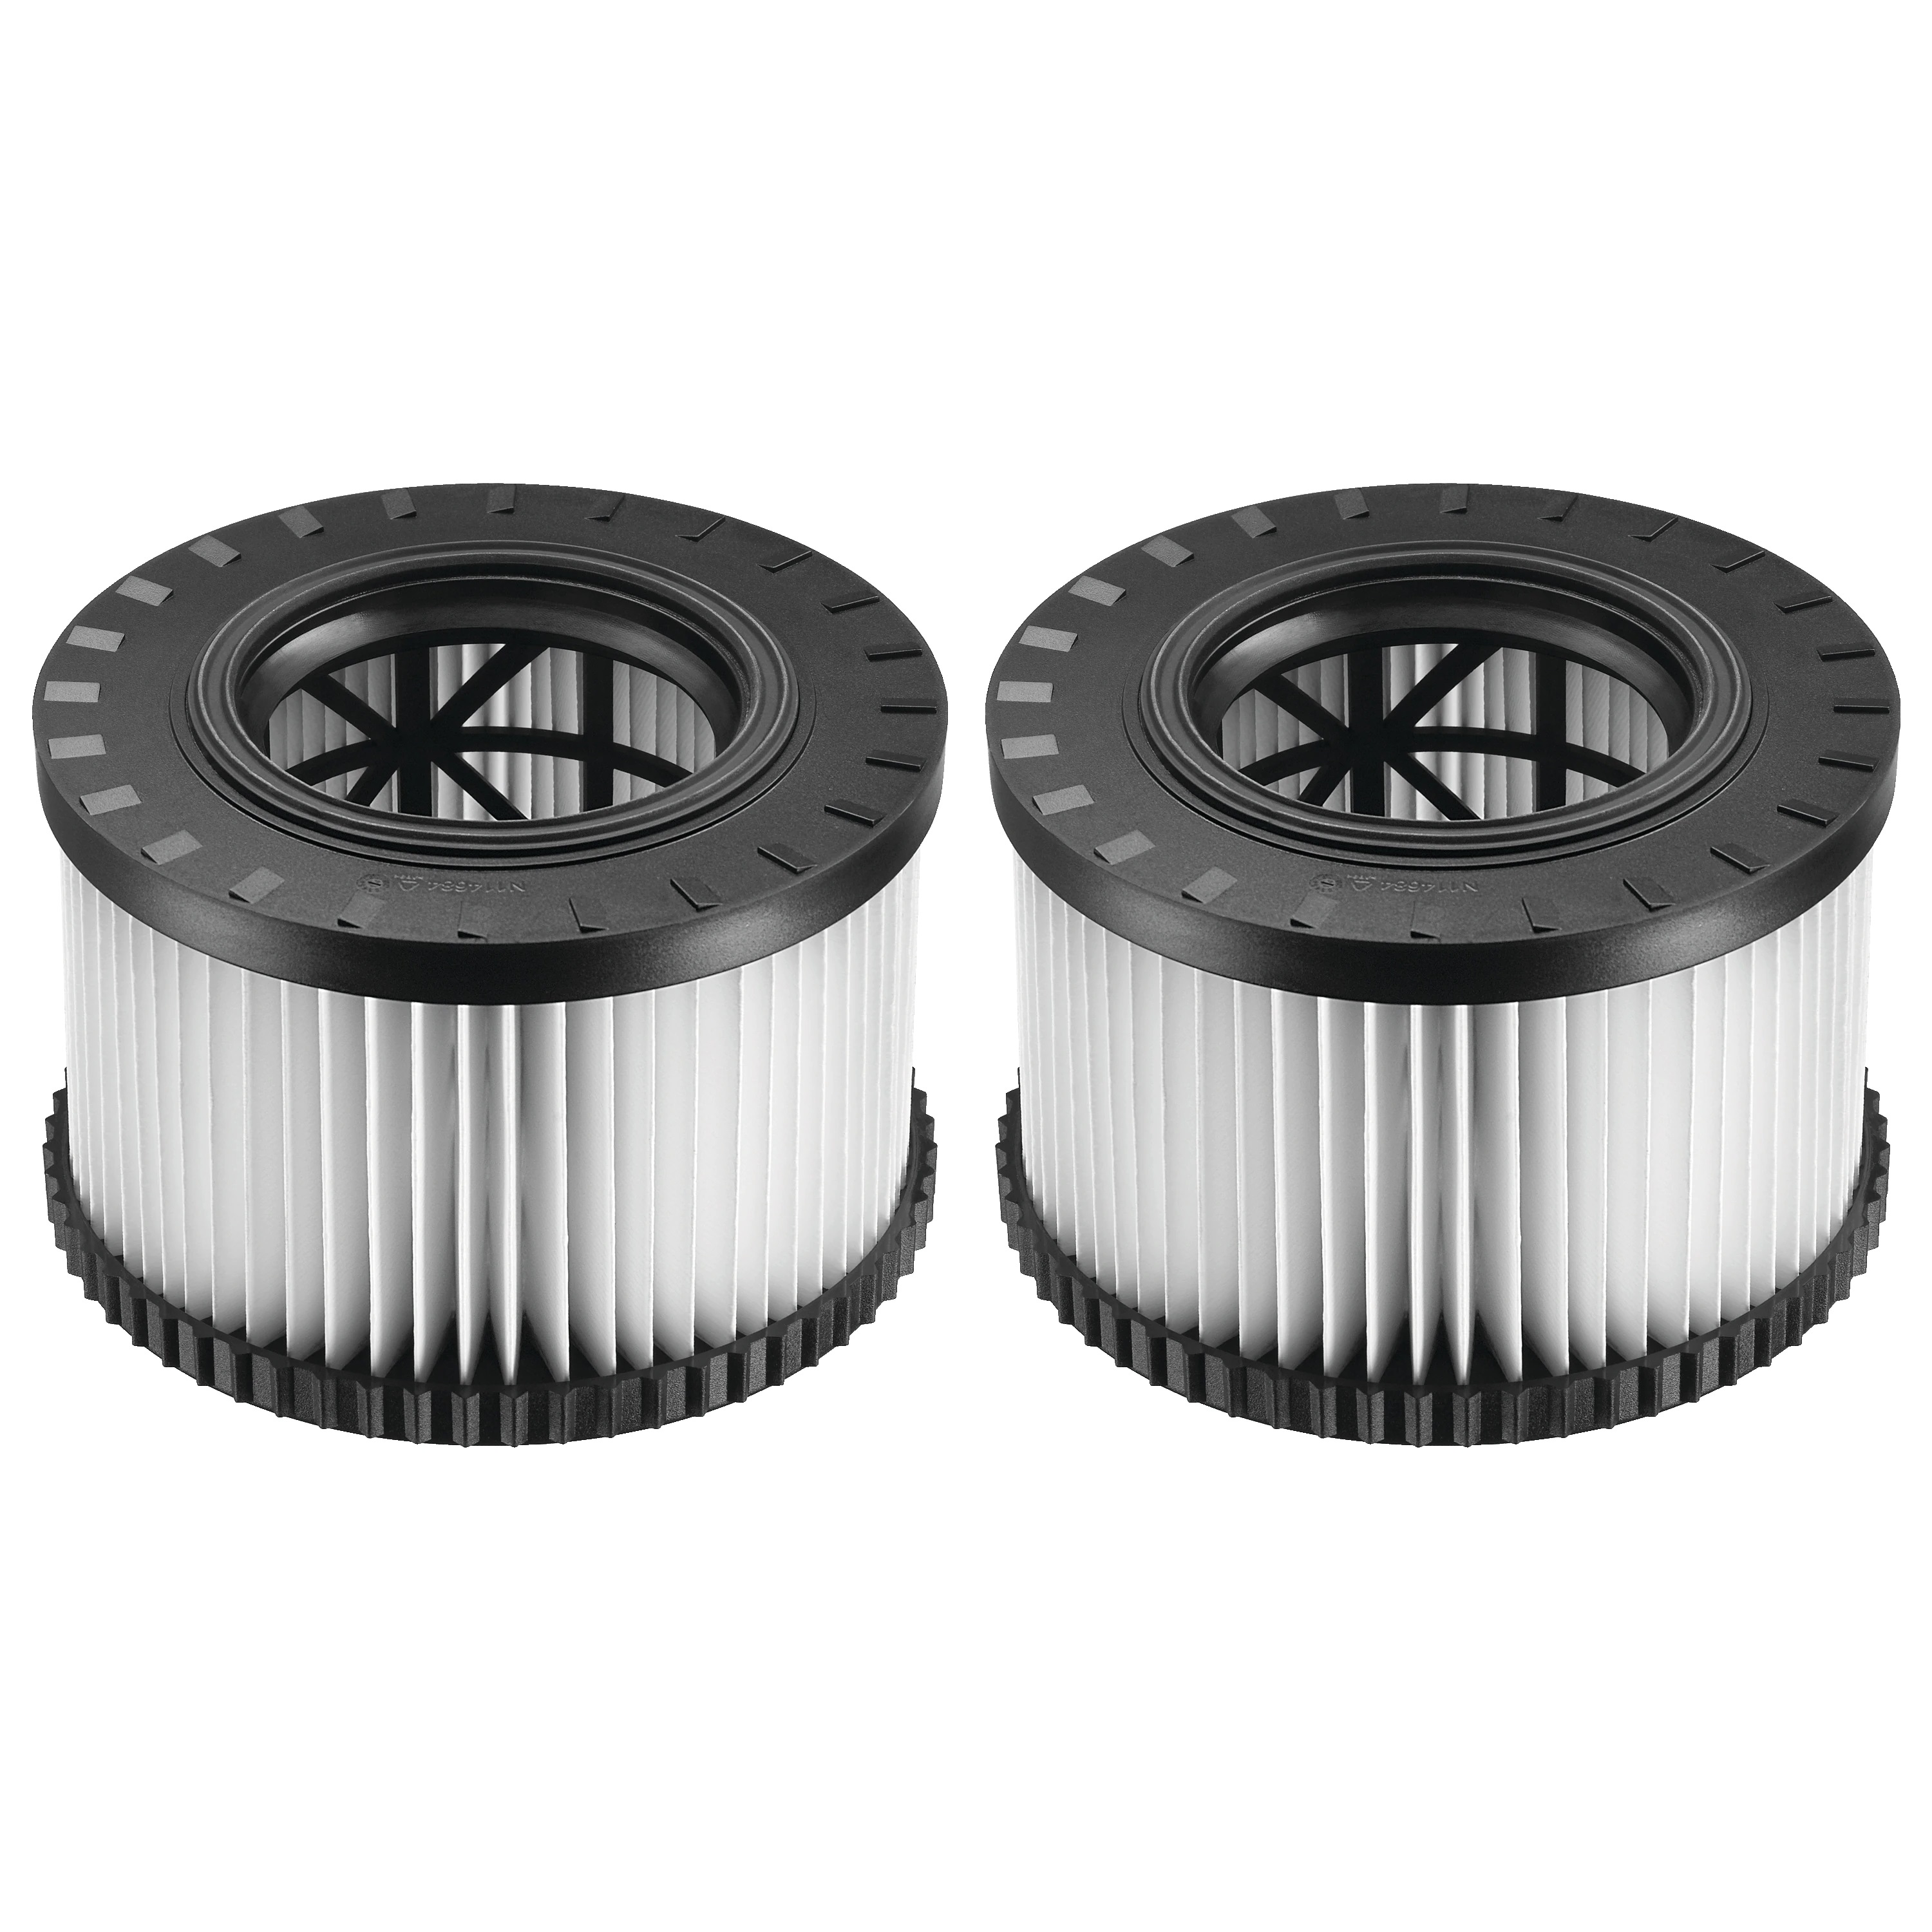 Replacement HEPA Filter Set for DWV010 & DWV012 (TYPE 2) Dust Extractors - Dustless Attachments